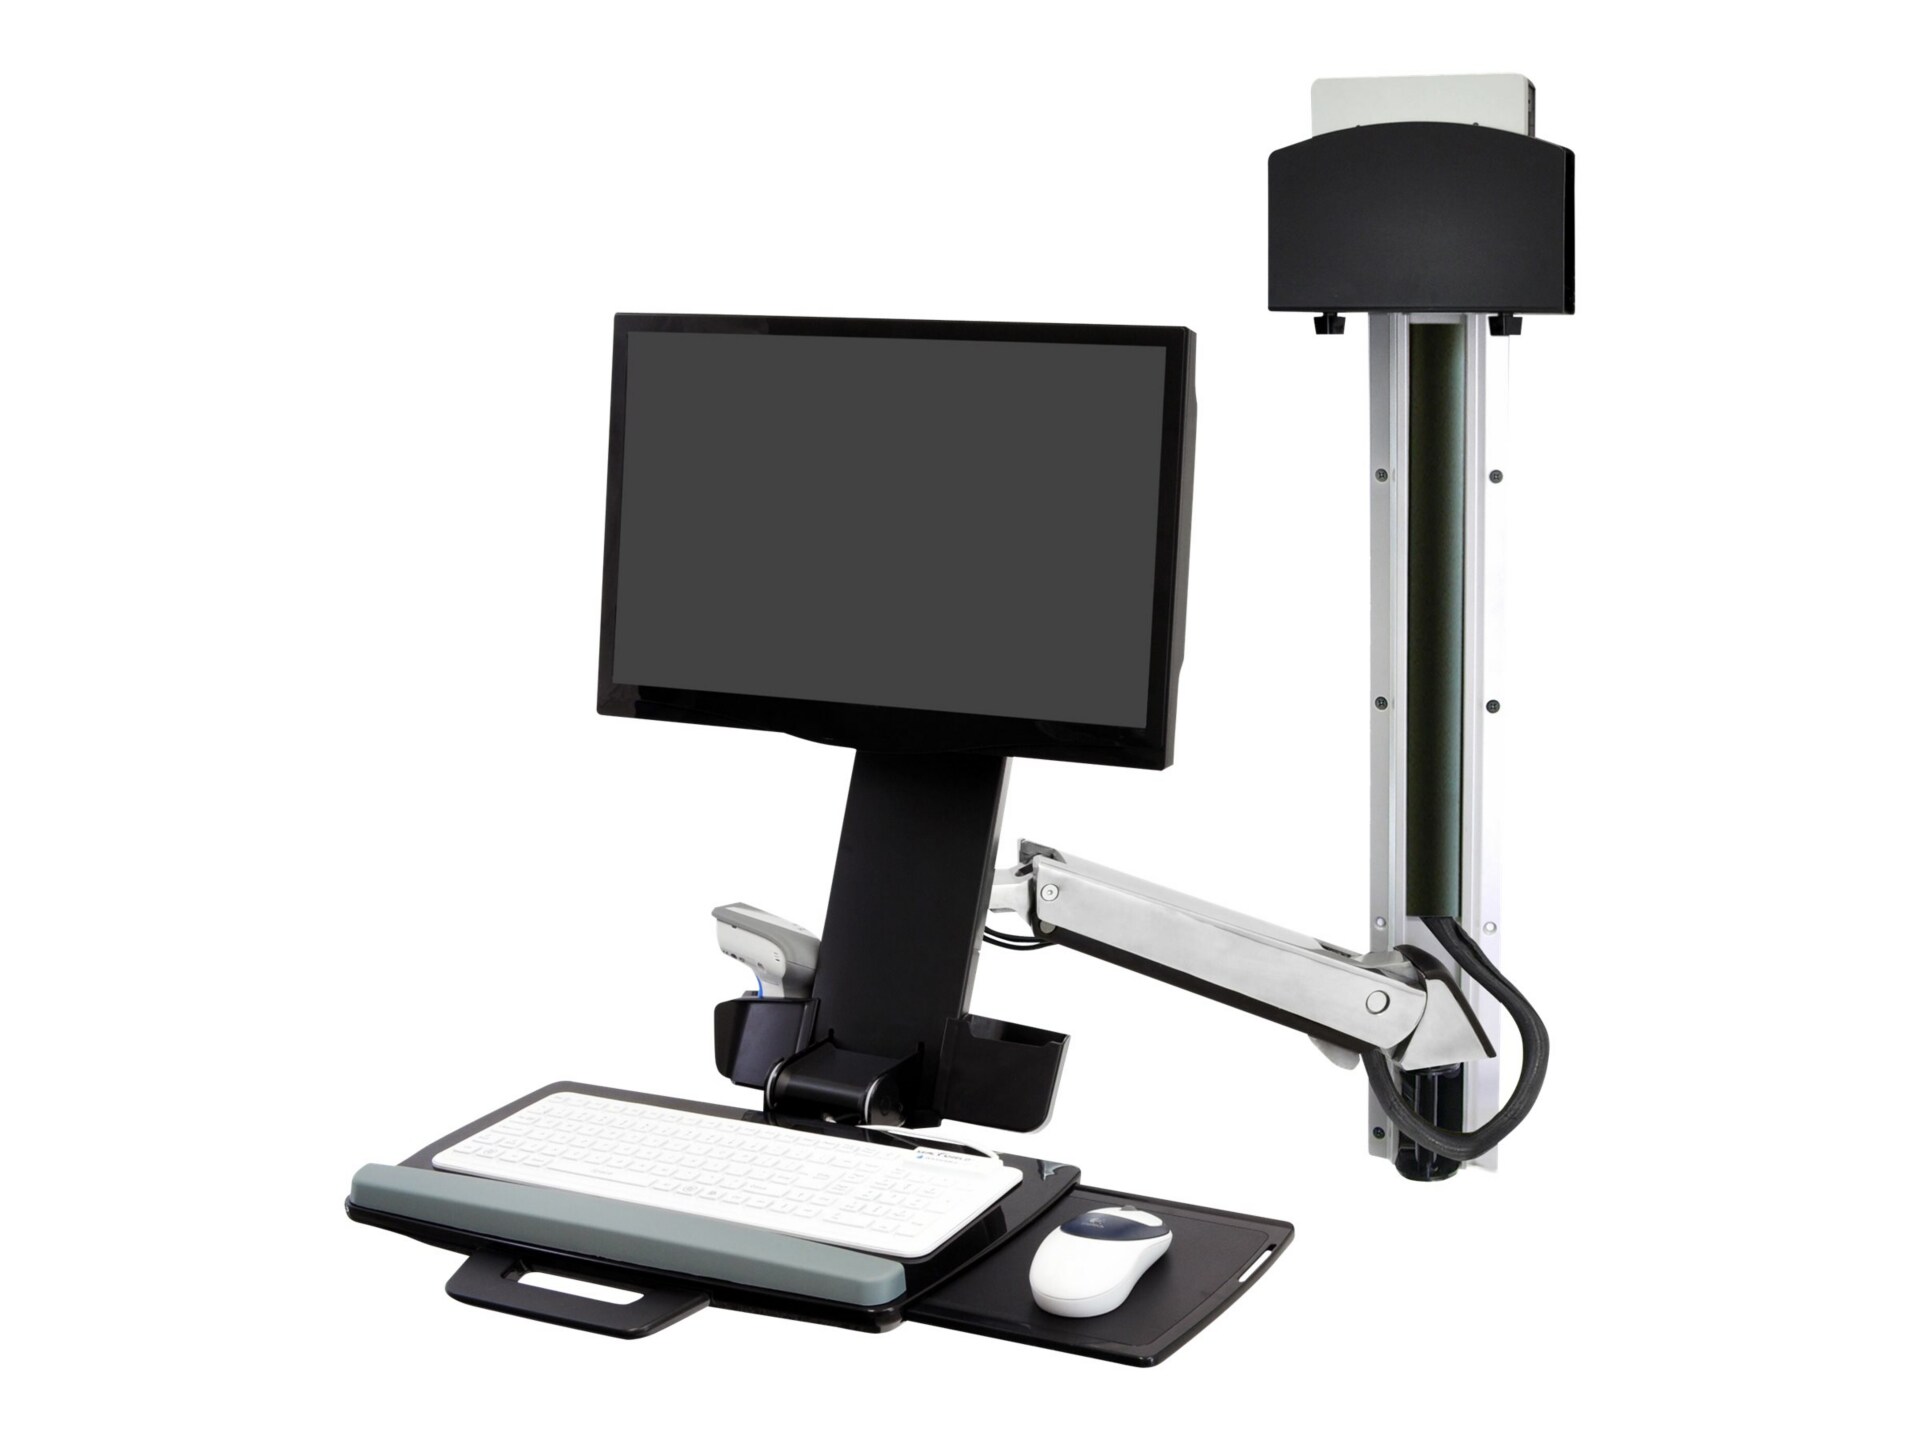 Ergotron StyleView Sit-Stand Combo System mounting kit - for LCD display / keyboard / mouse / barcode scanner / CPU -